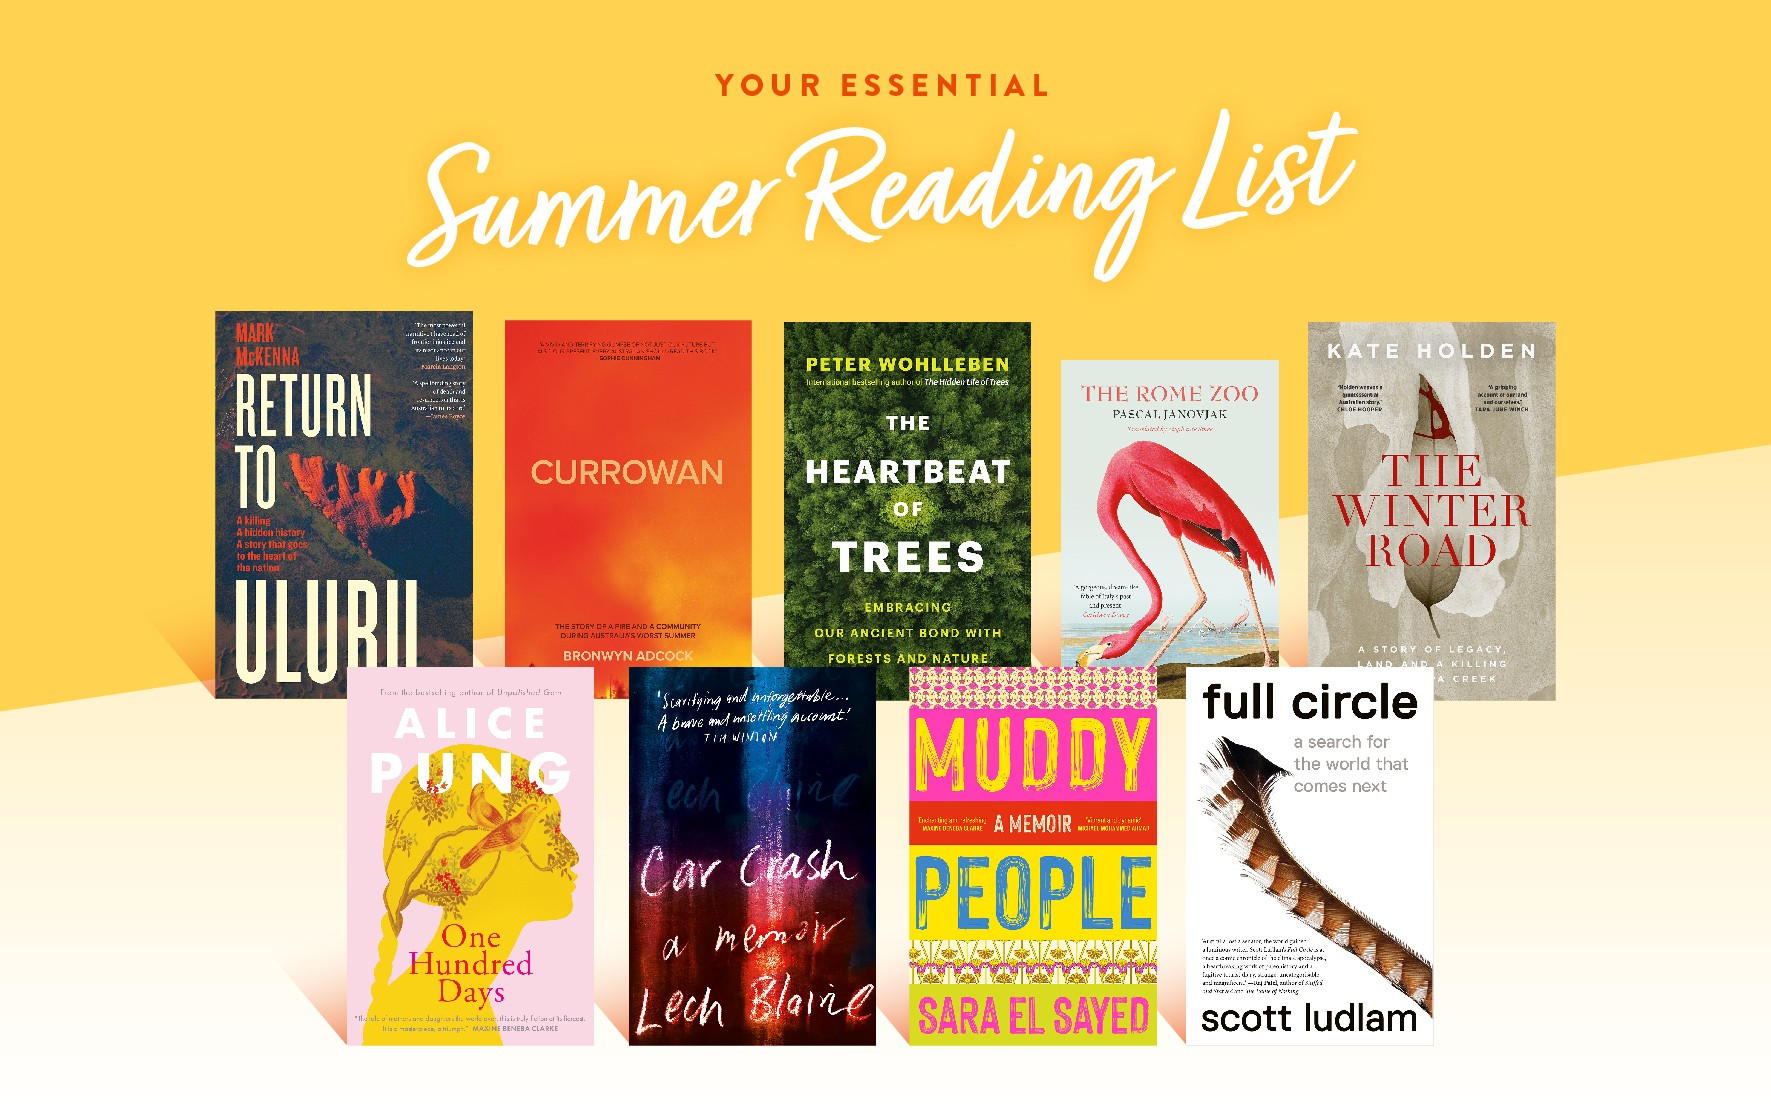 Your Essential Summer Reading List 